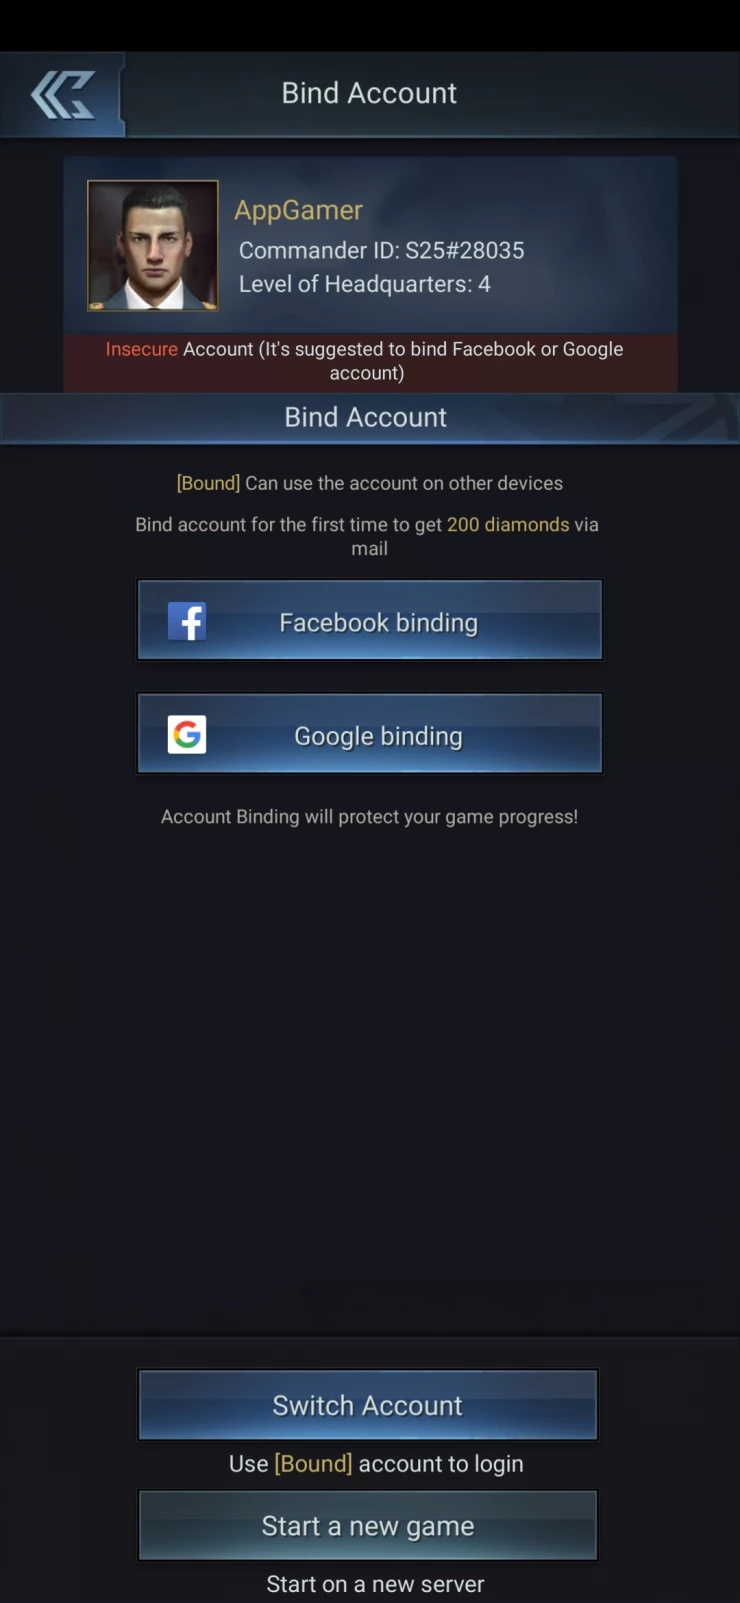 Bind Your Account to Keep it Safe